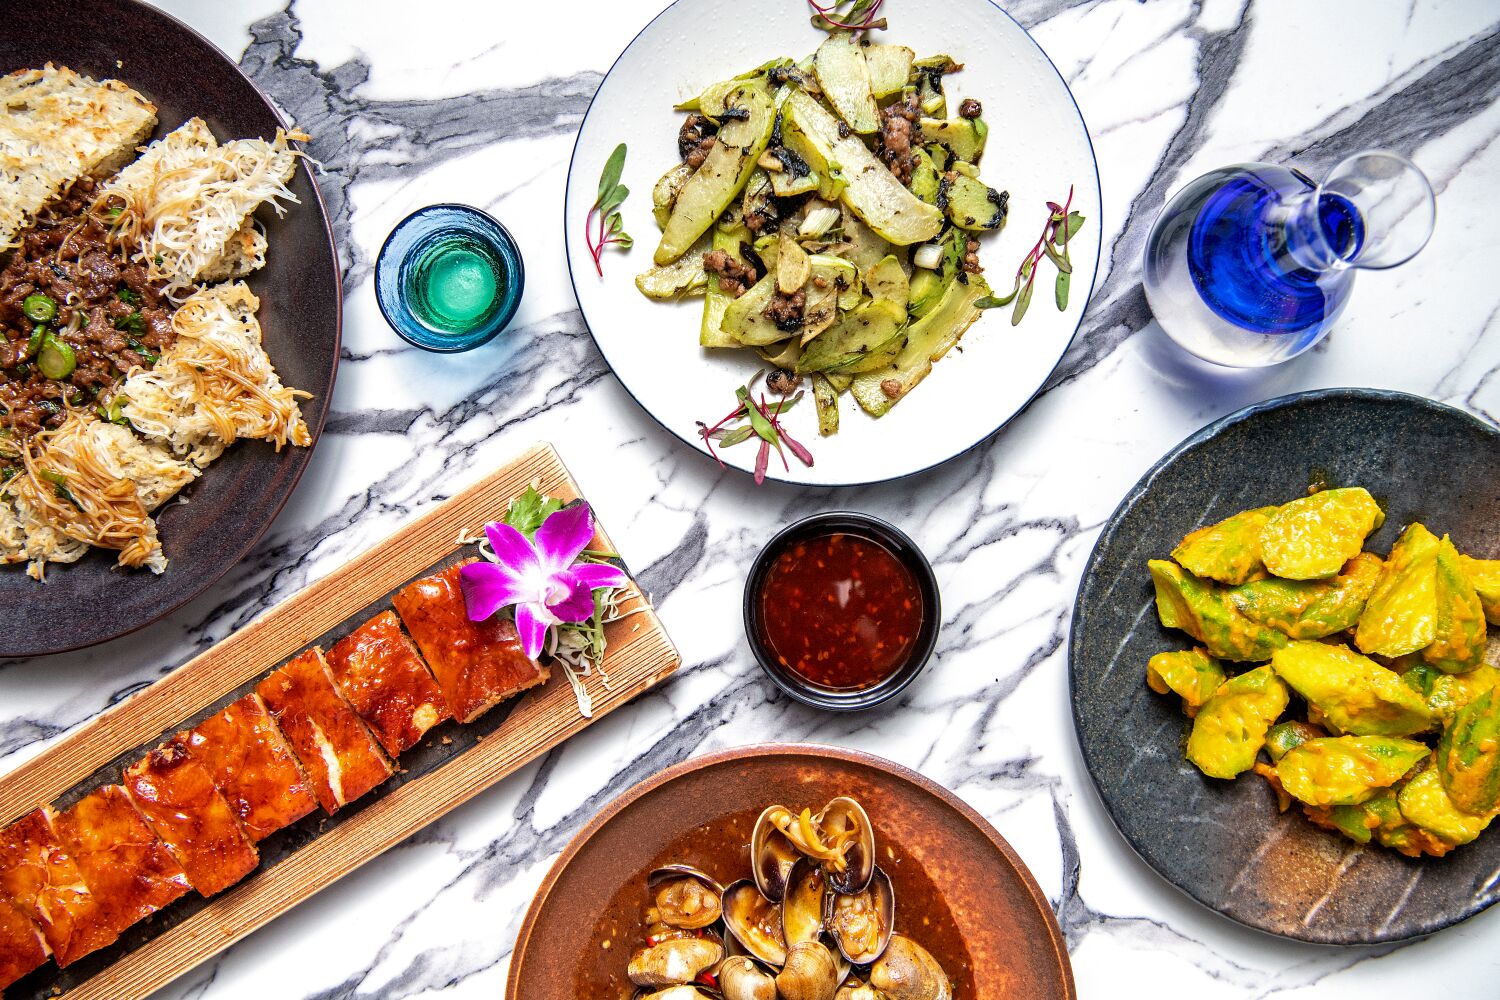 At Colette, Los Angeles' next generation of Cantonese cuisine takes shape